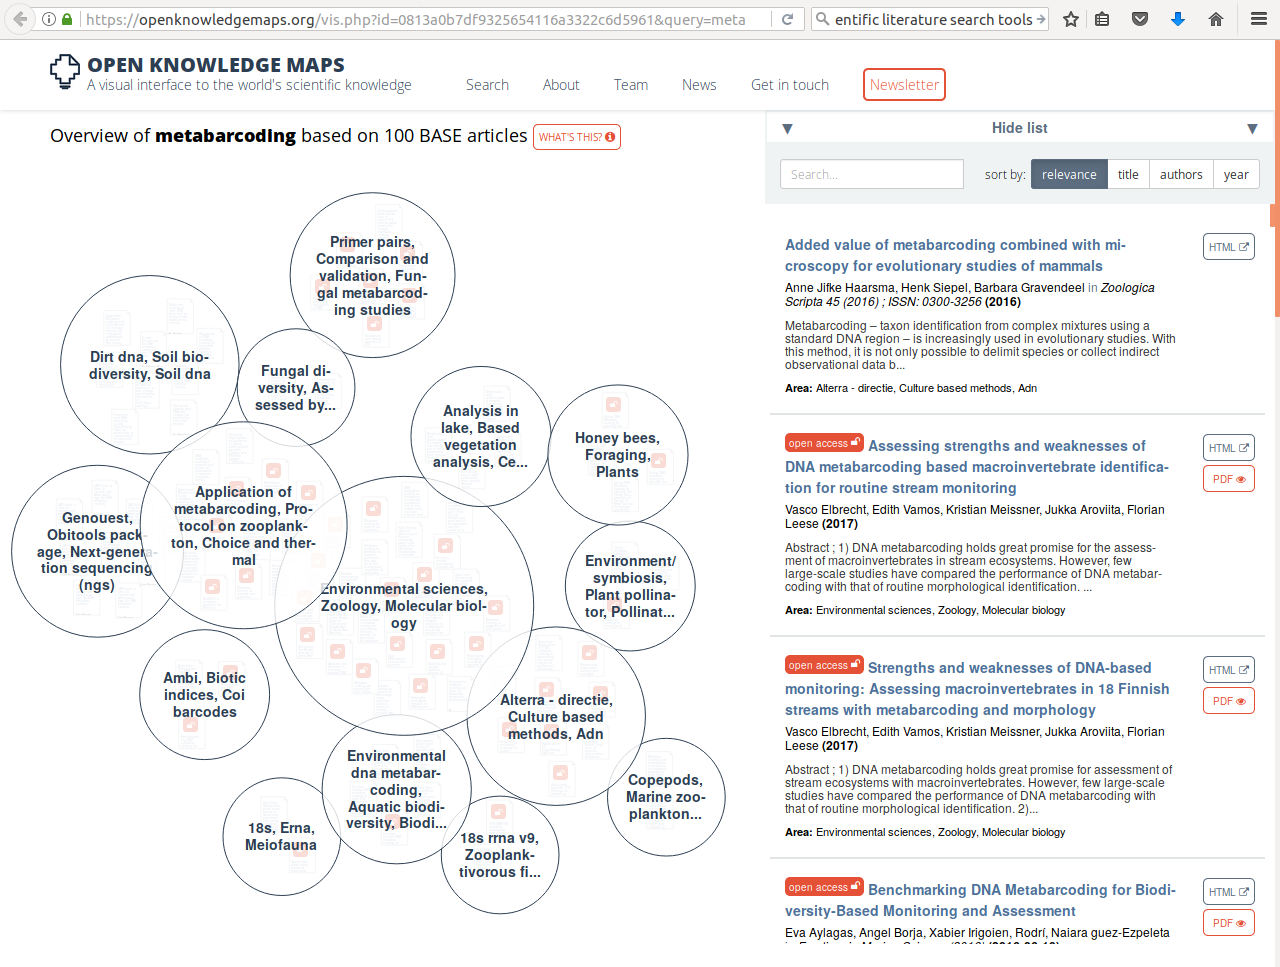 Example 1, using the Open Knowledge Maps tool to search for a keyword